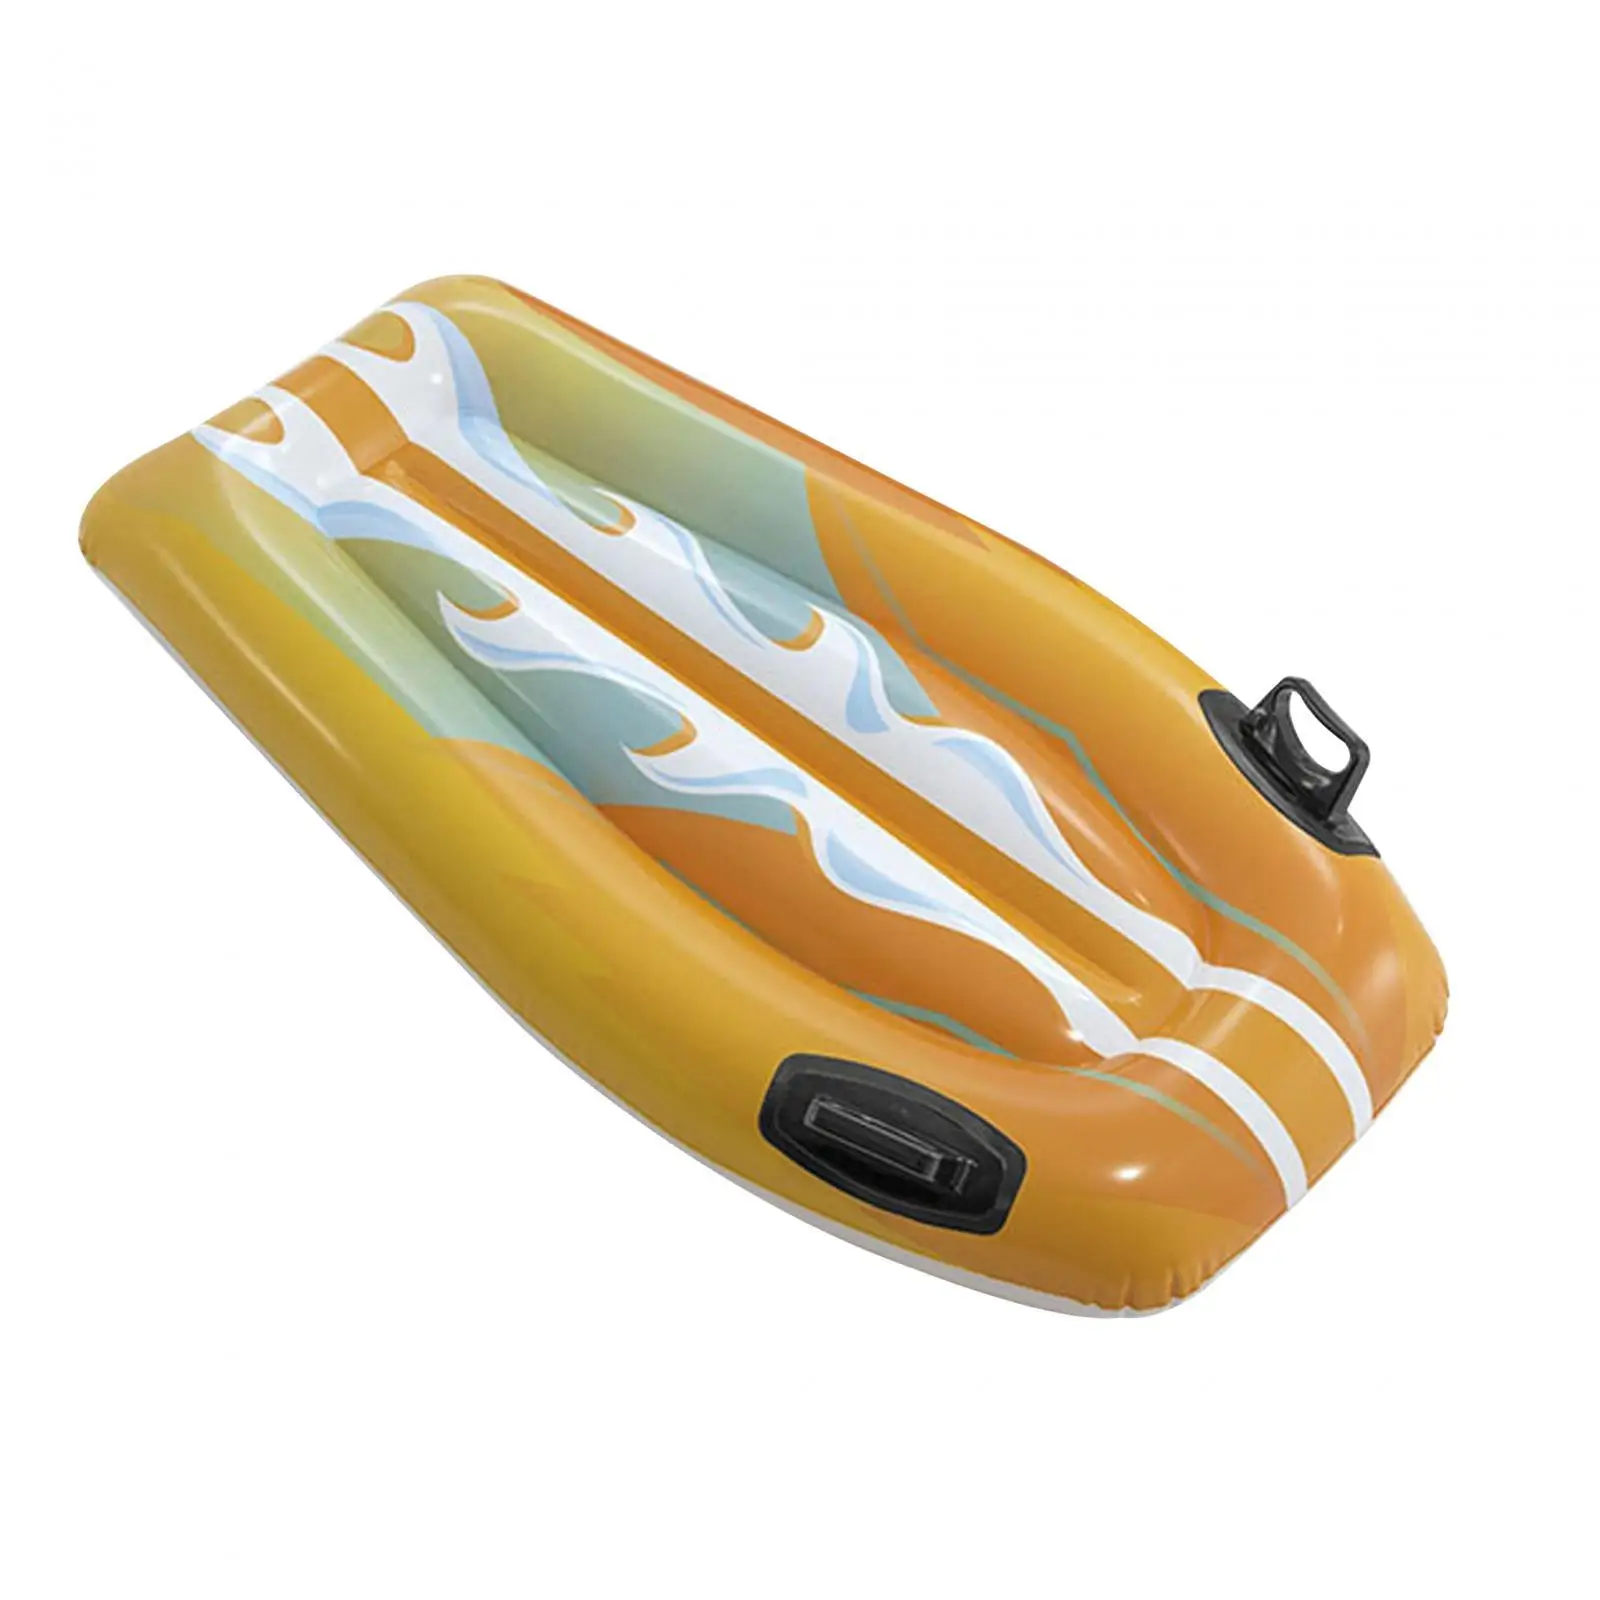 Inflatable Surfboard for Kids Summer Pool Toy Floating Surfboard for Slip and Slide Portable Float Boards with Handle